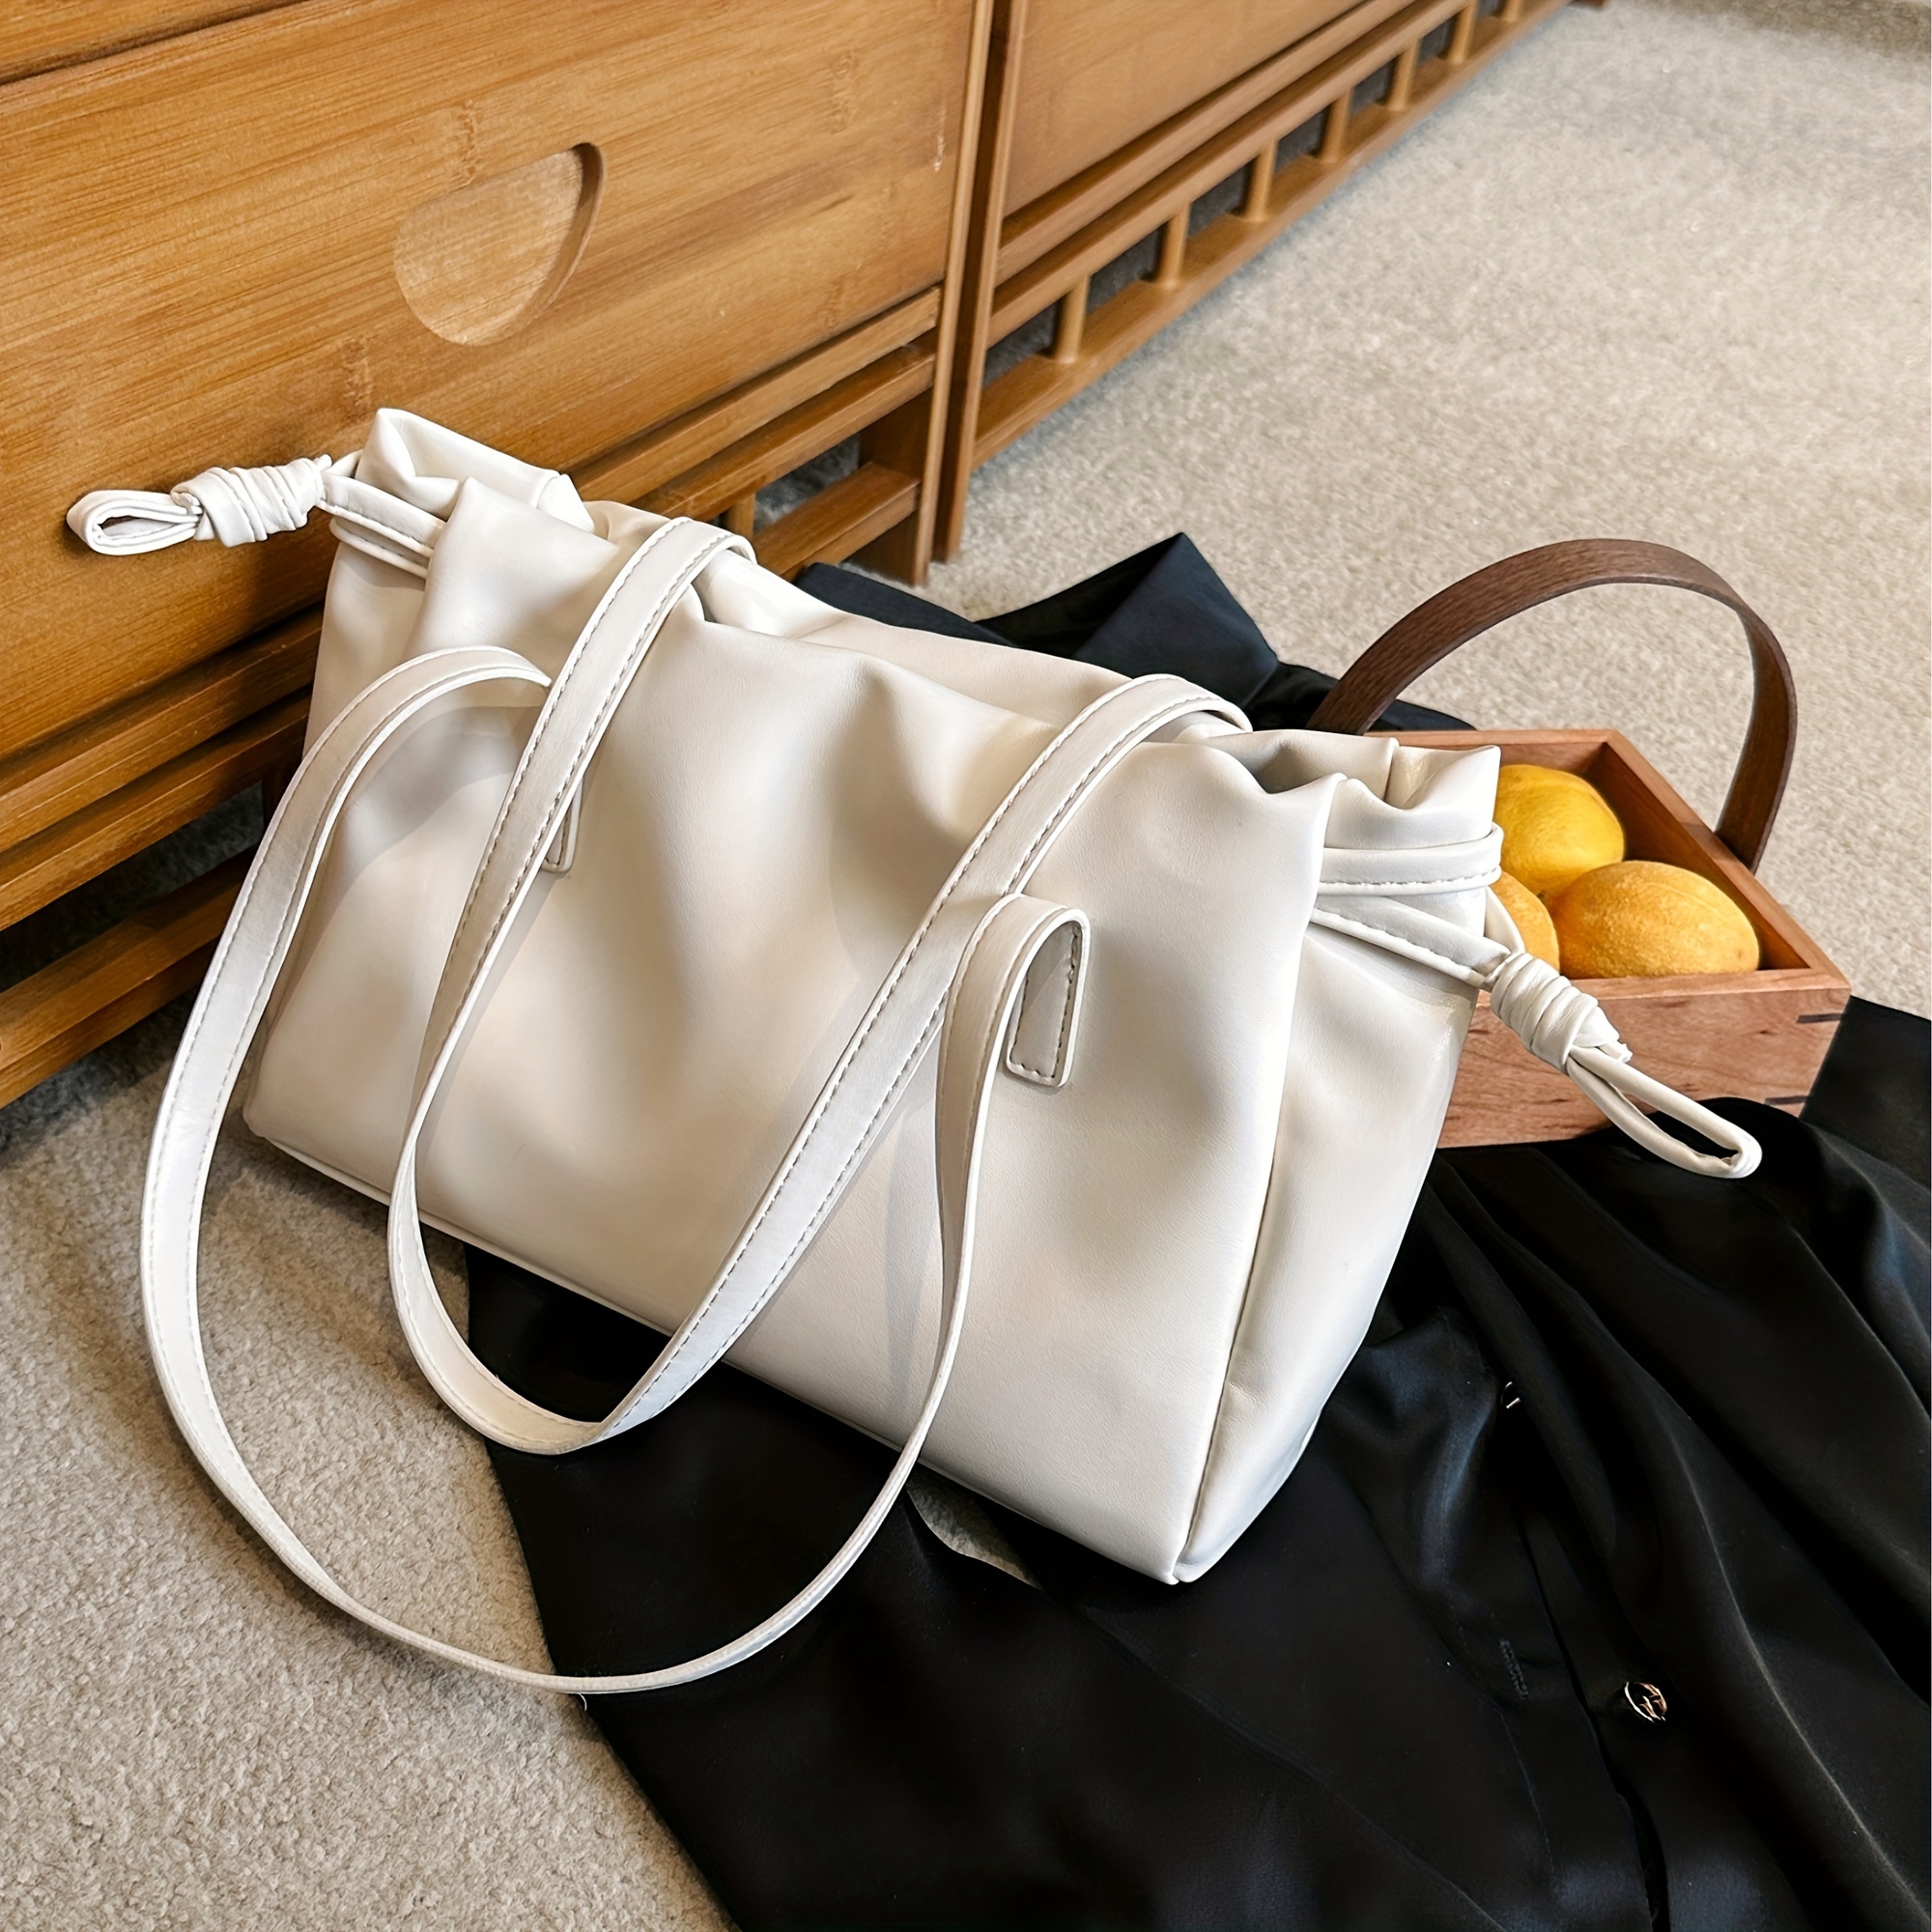 White Leather versatile clutch bag with strap